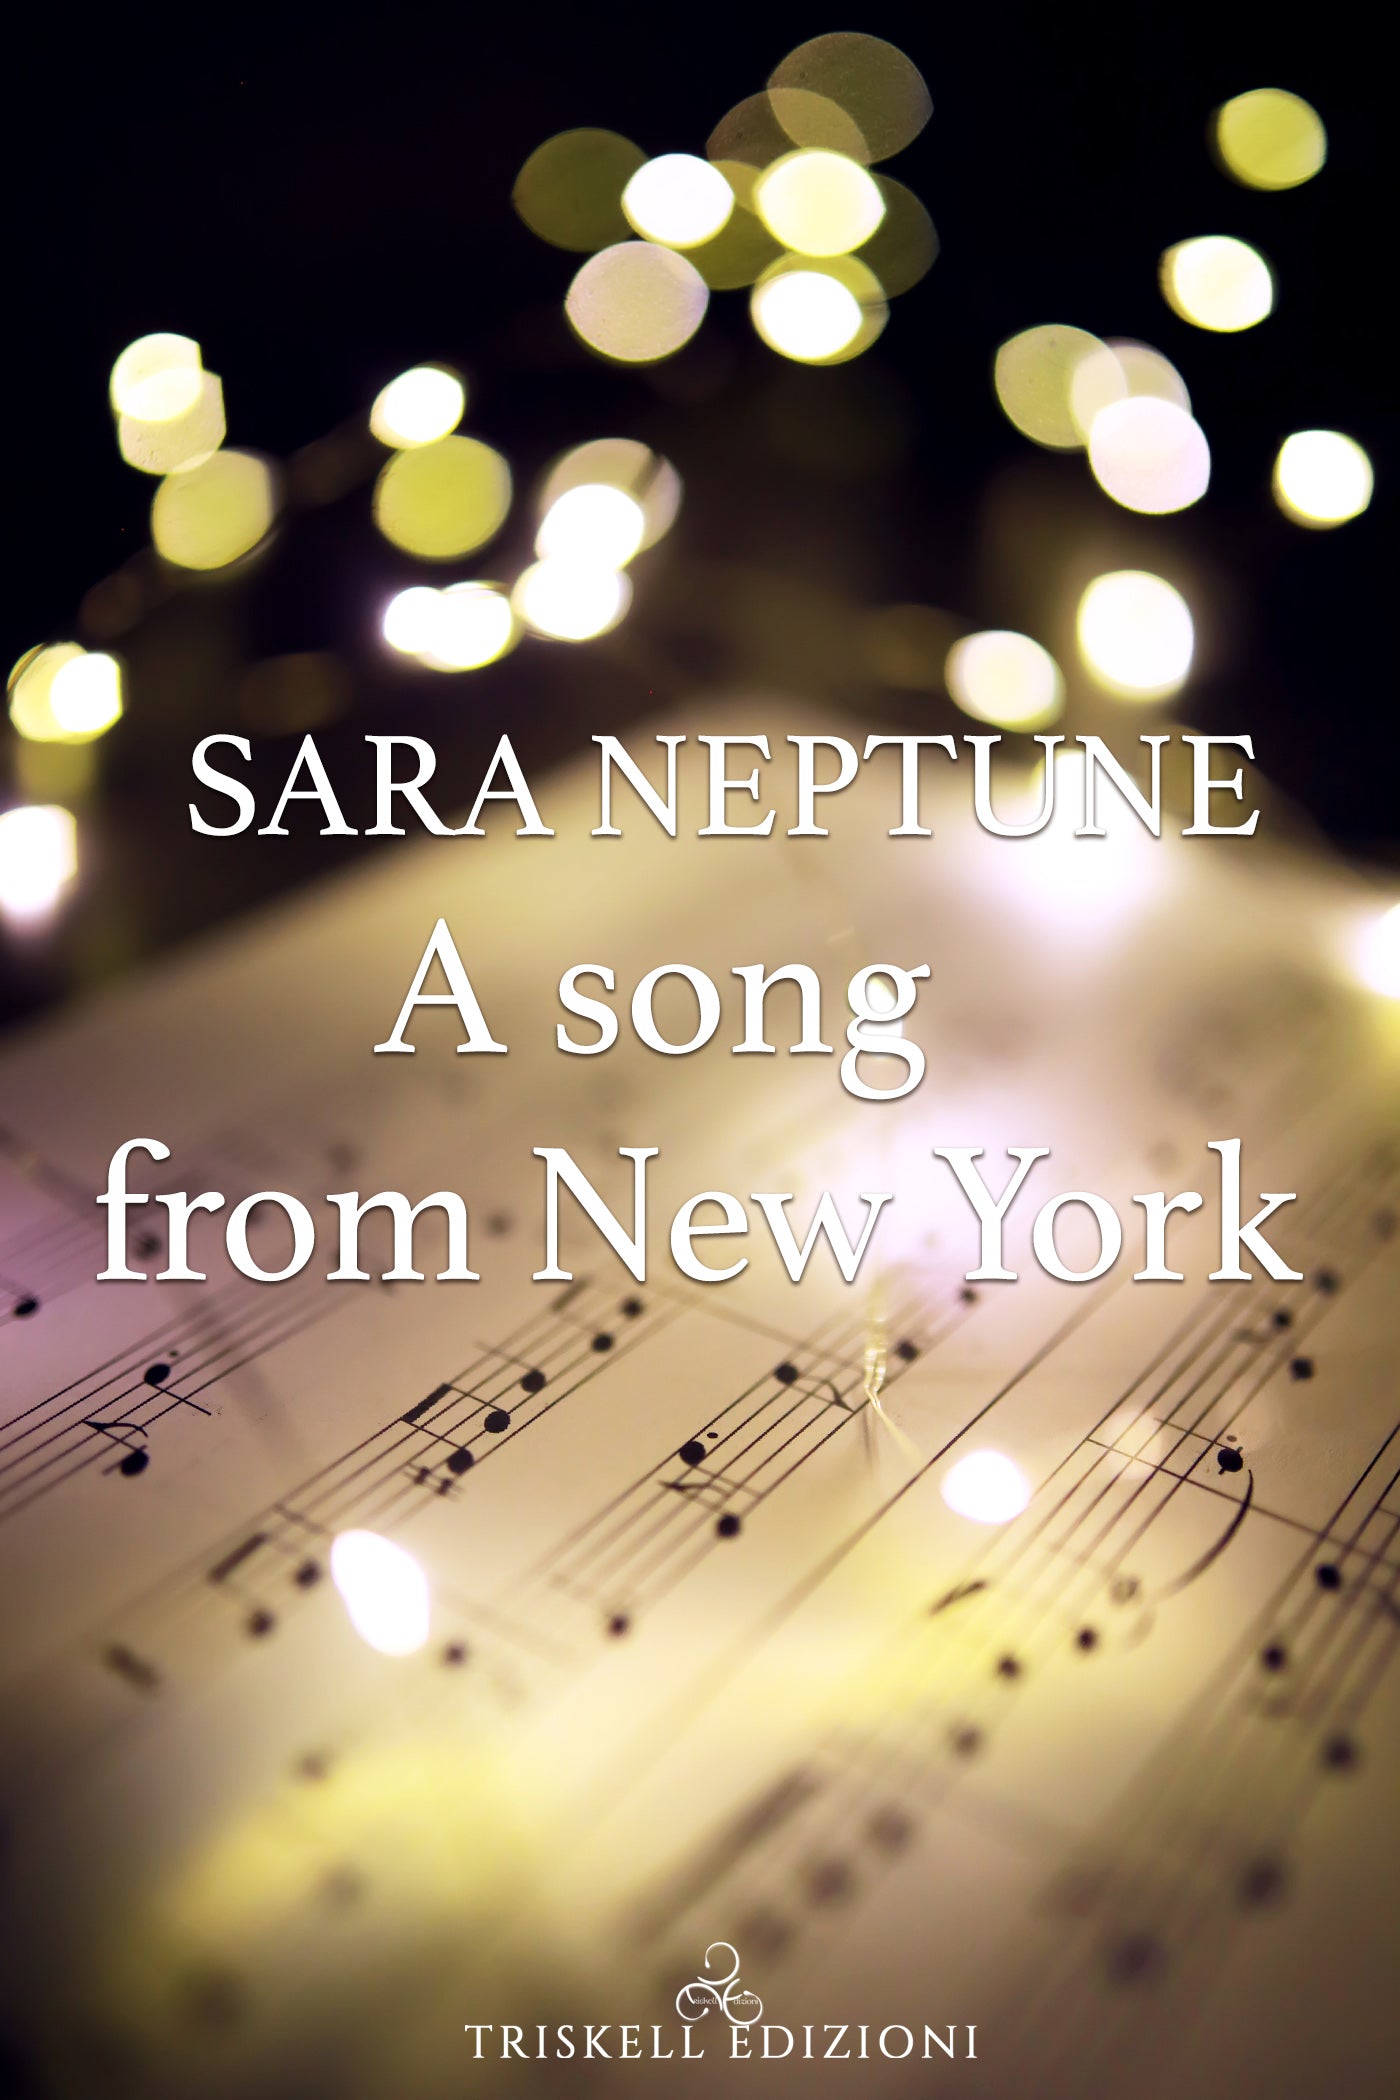 A song from New York - Sara Neptune